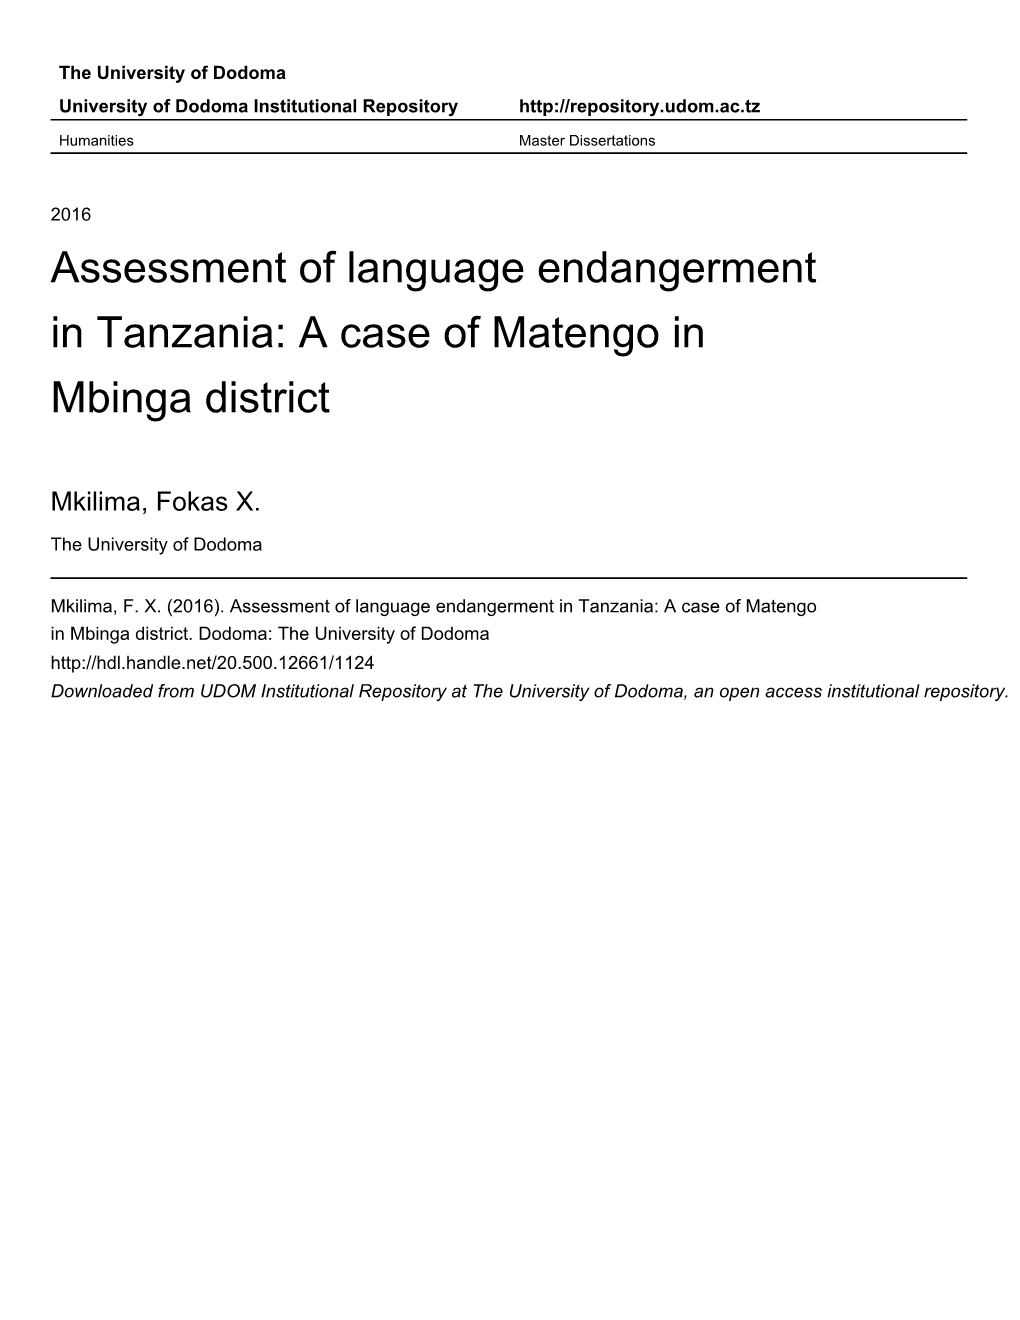 Assessment of Language Endangerment in Tanzania: a Case of Matengo in Mbinga District